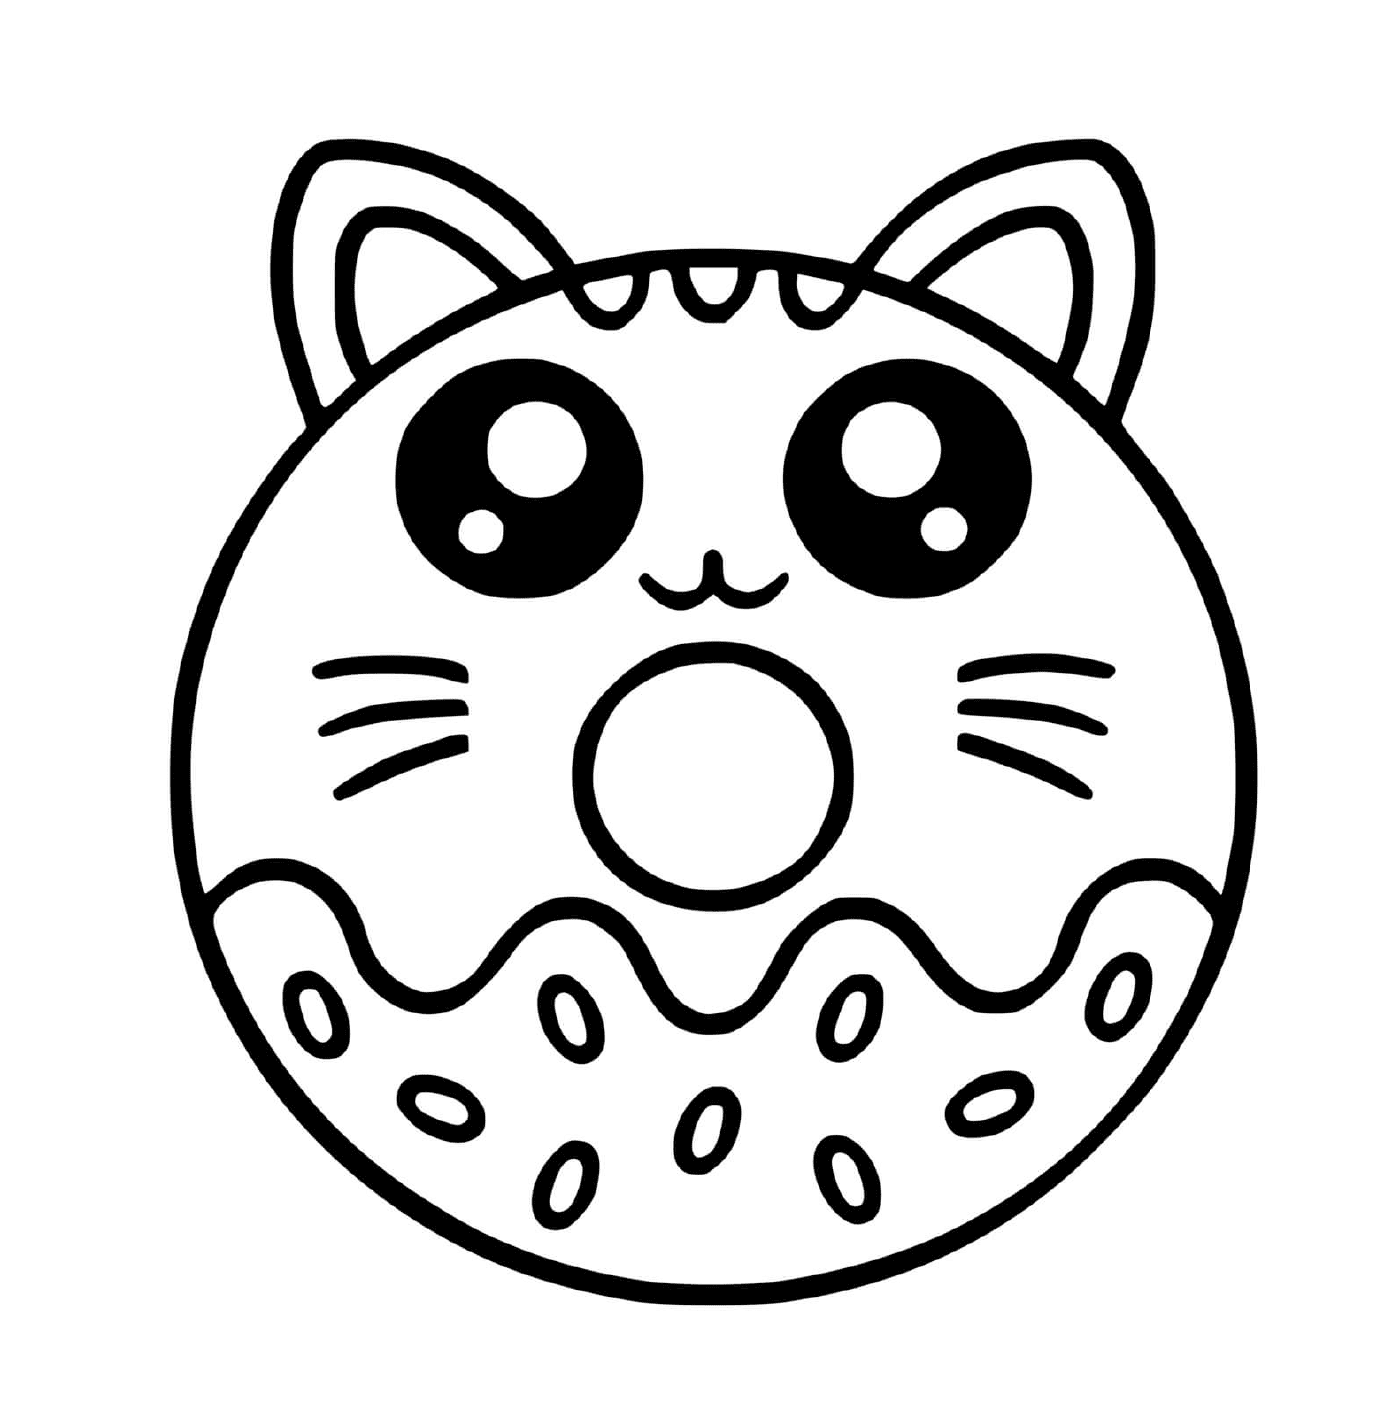  A donut with a cat face 